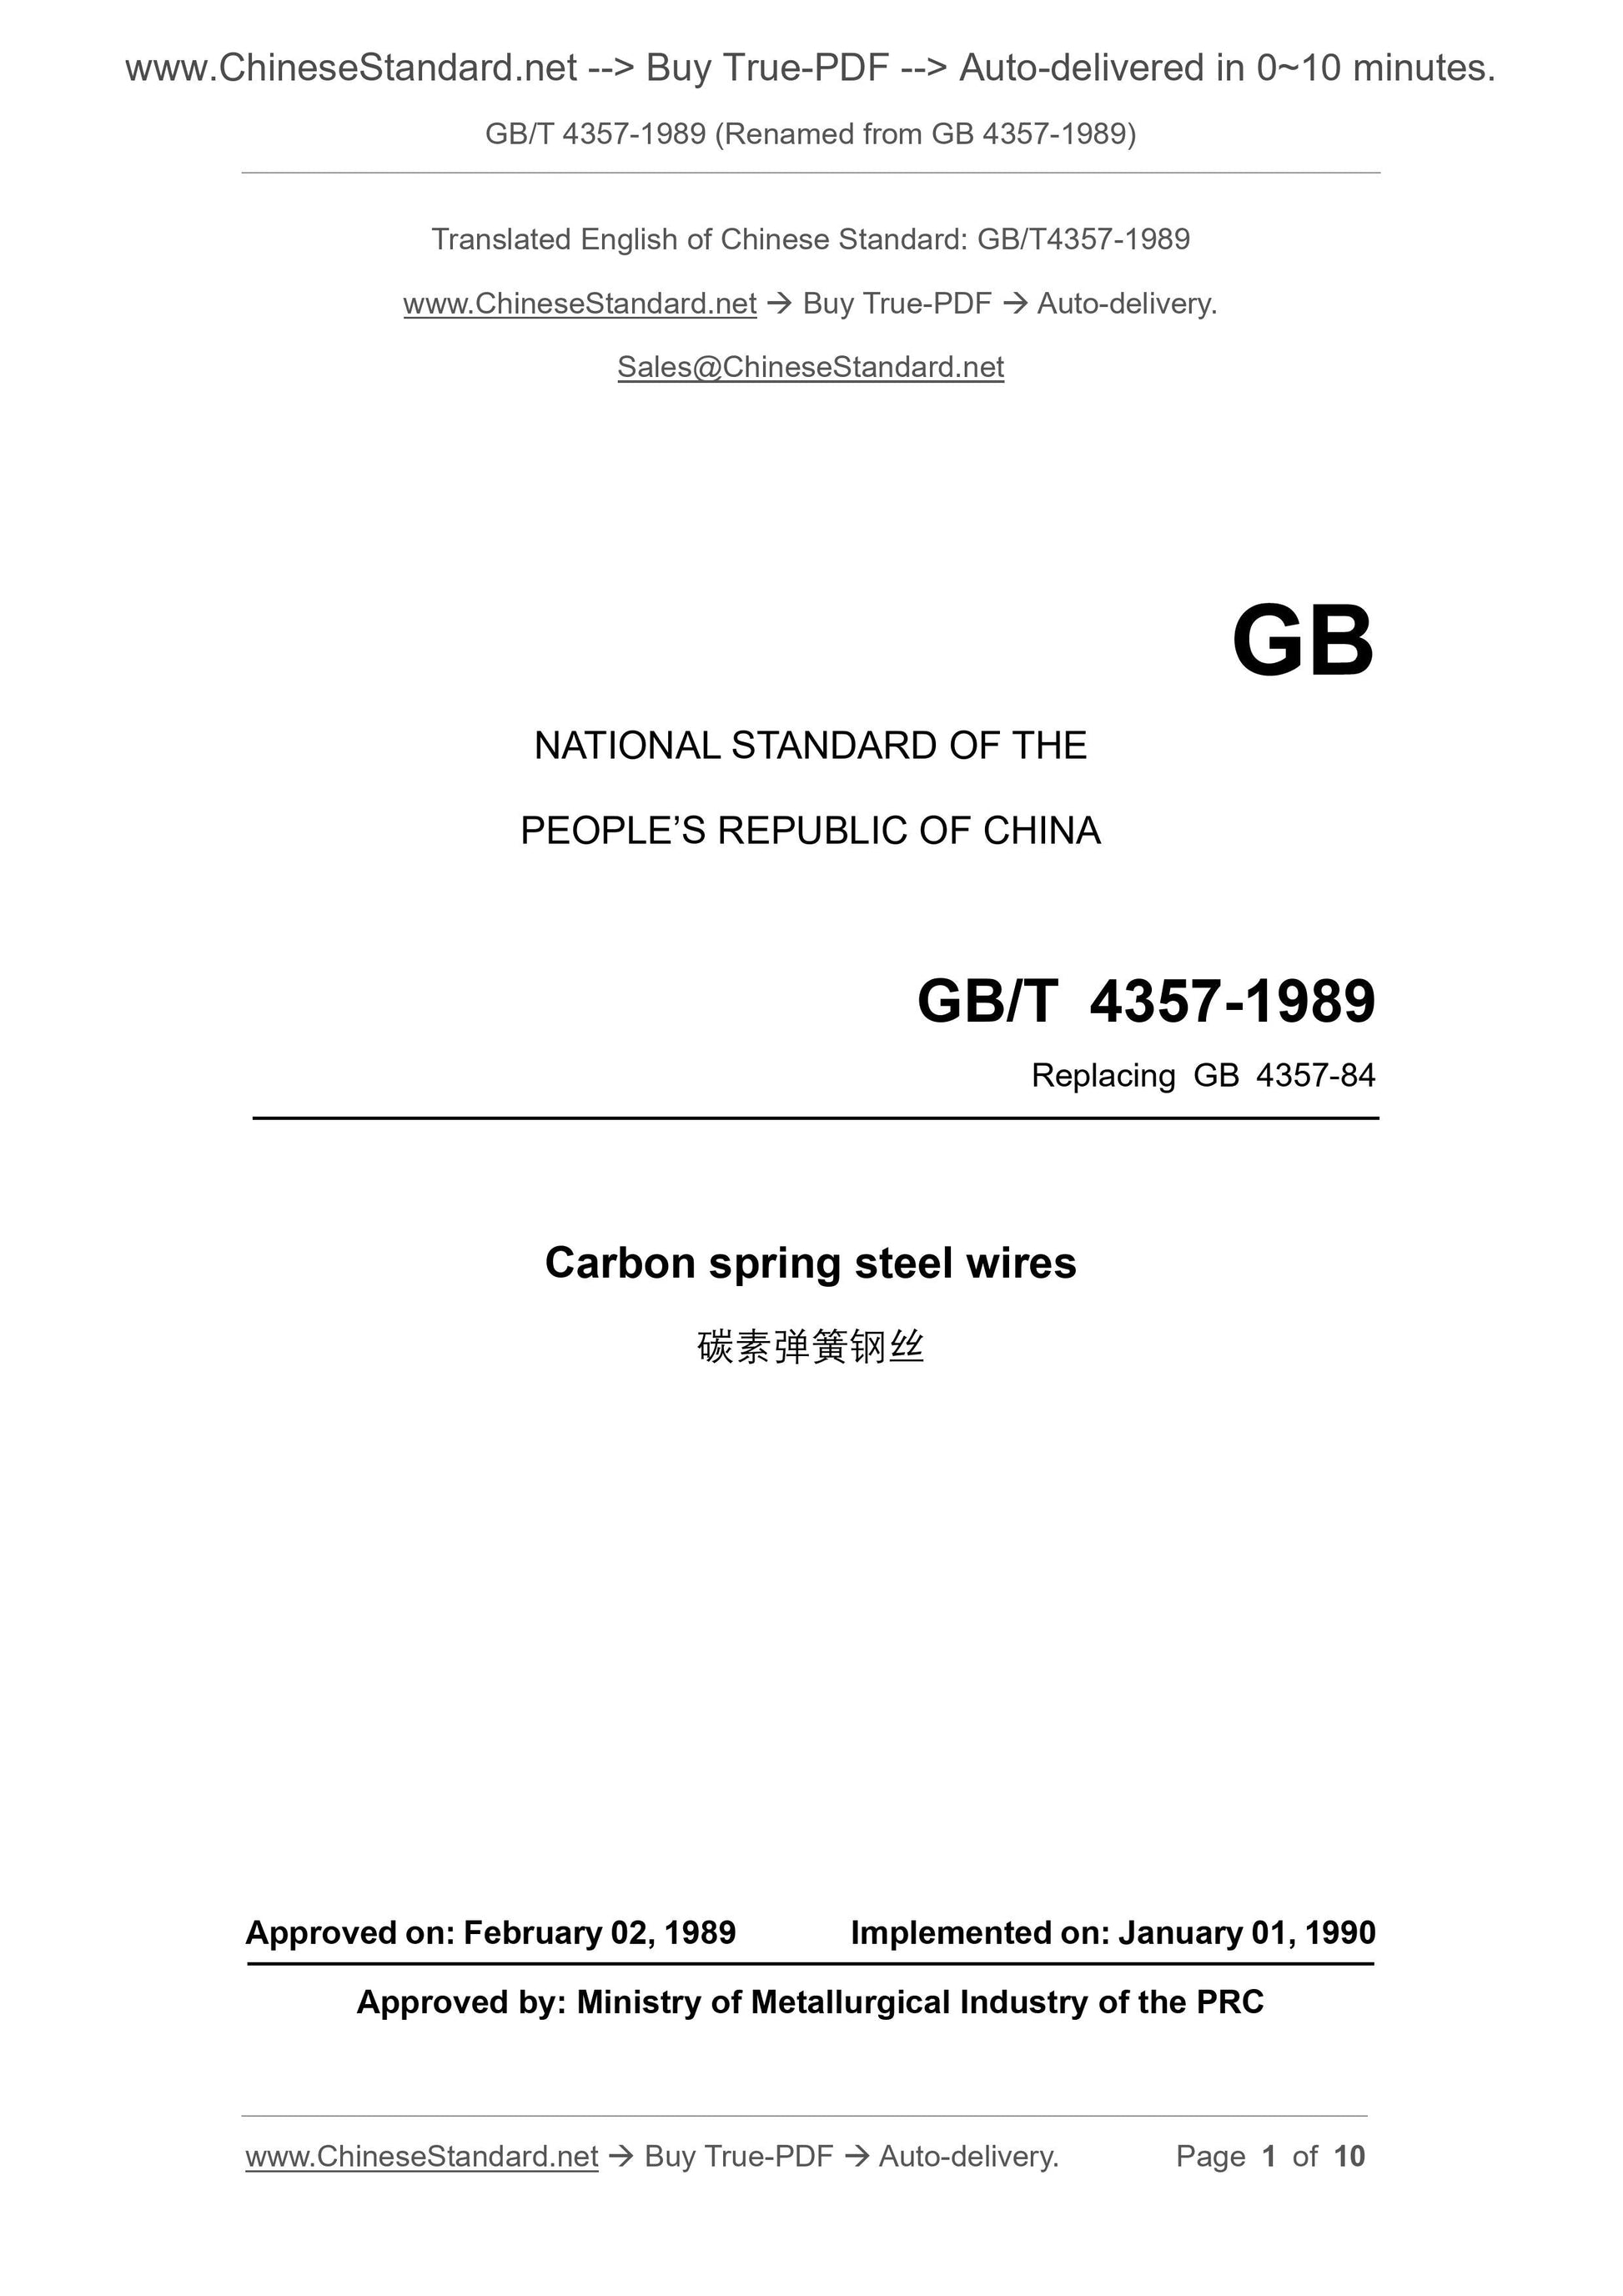 GB/T 4357-1989 Page 1